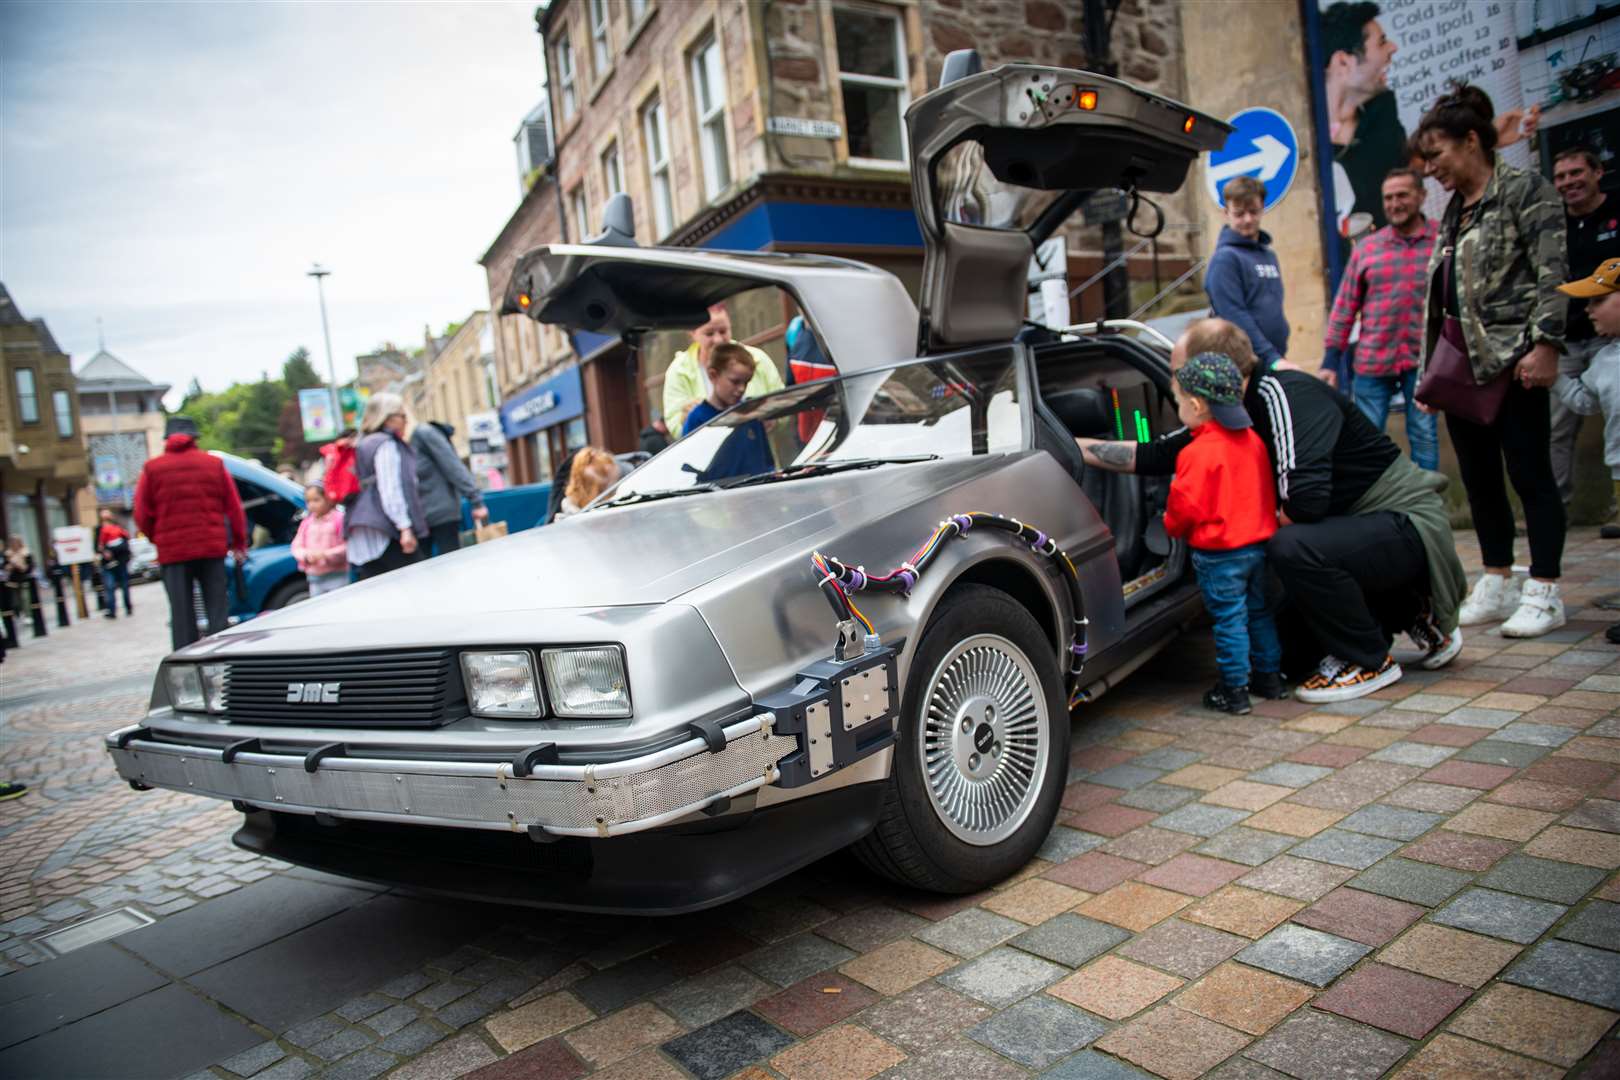 A version of the car from the beloved Back to the Future films was a big draw on the day. Picture: Callum Mackay